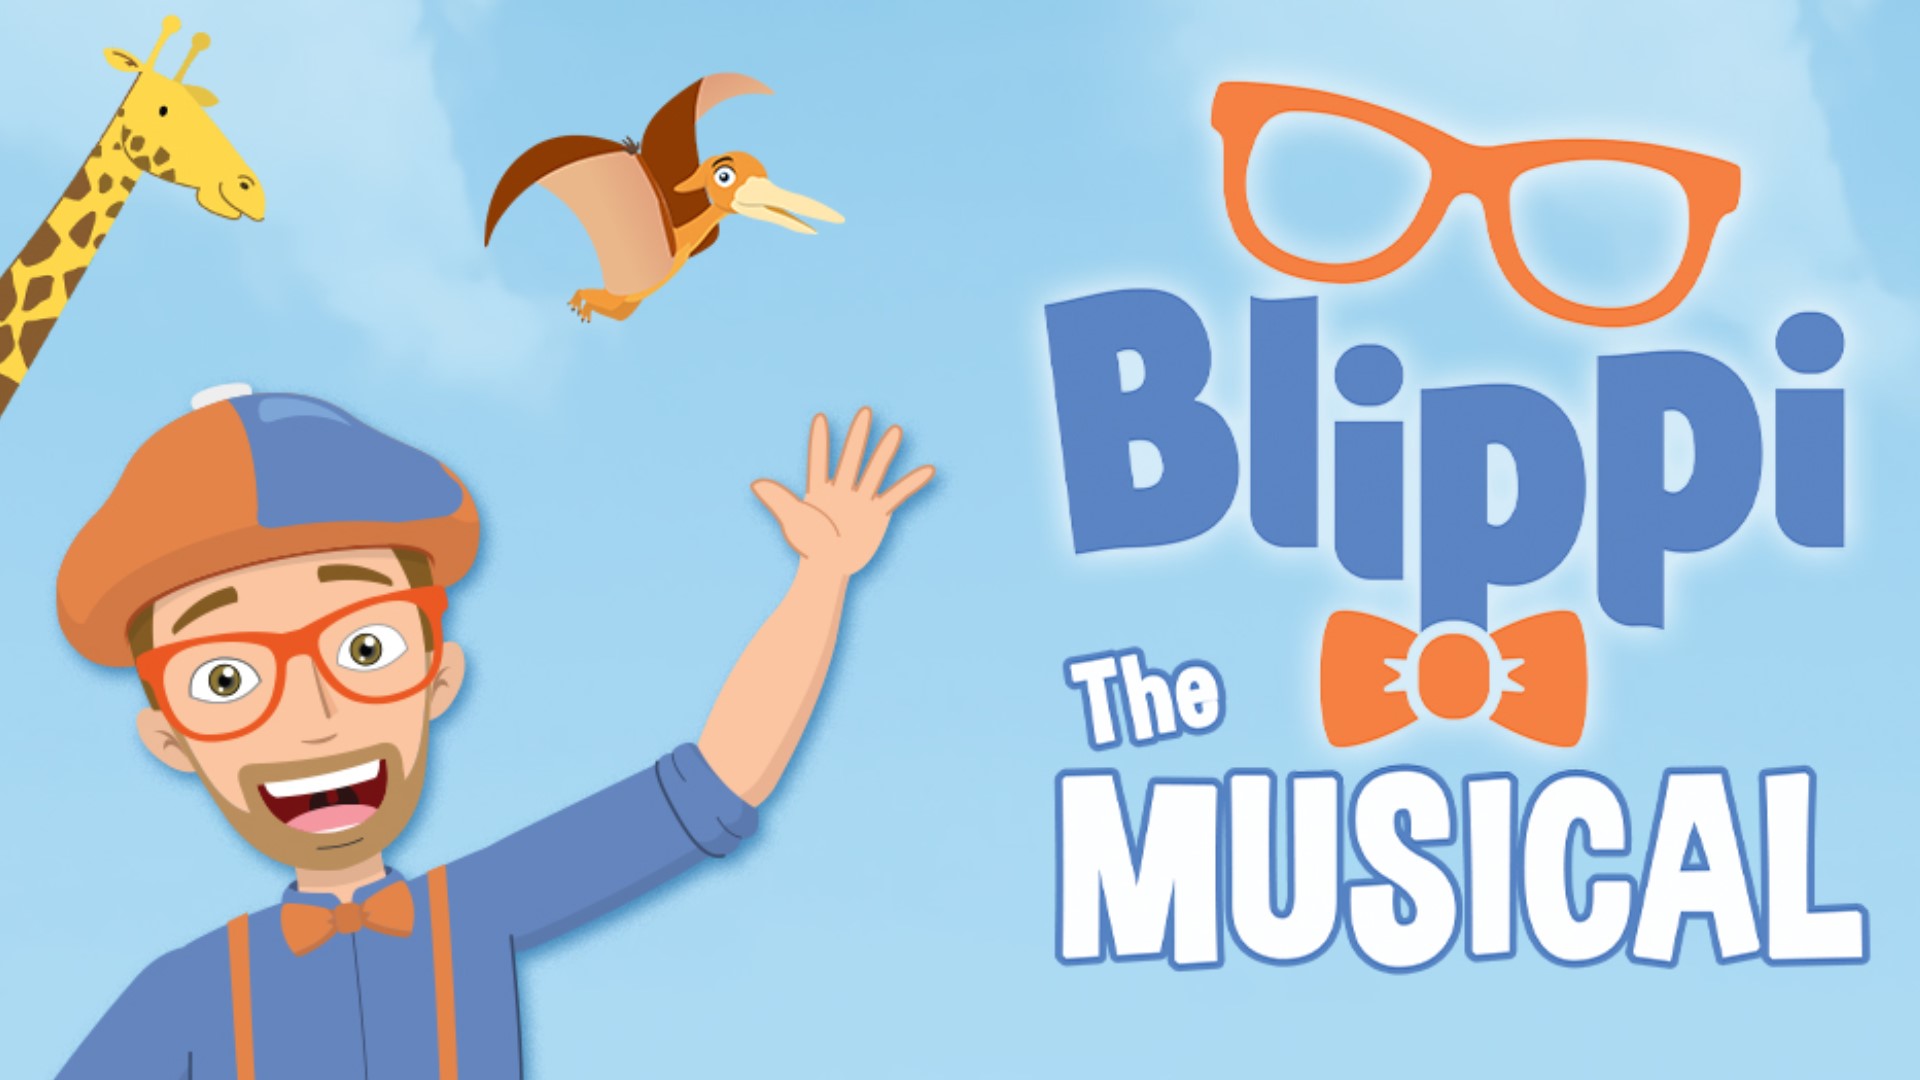 Children’s YouTube sensation Blippi will stop in Denver and Colorado Springs. Stevin John, the creator, writer and creative force of Blippi, does not appear however.